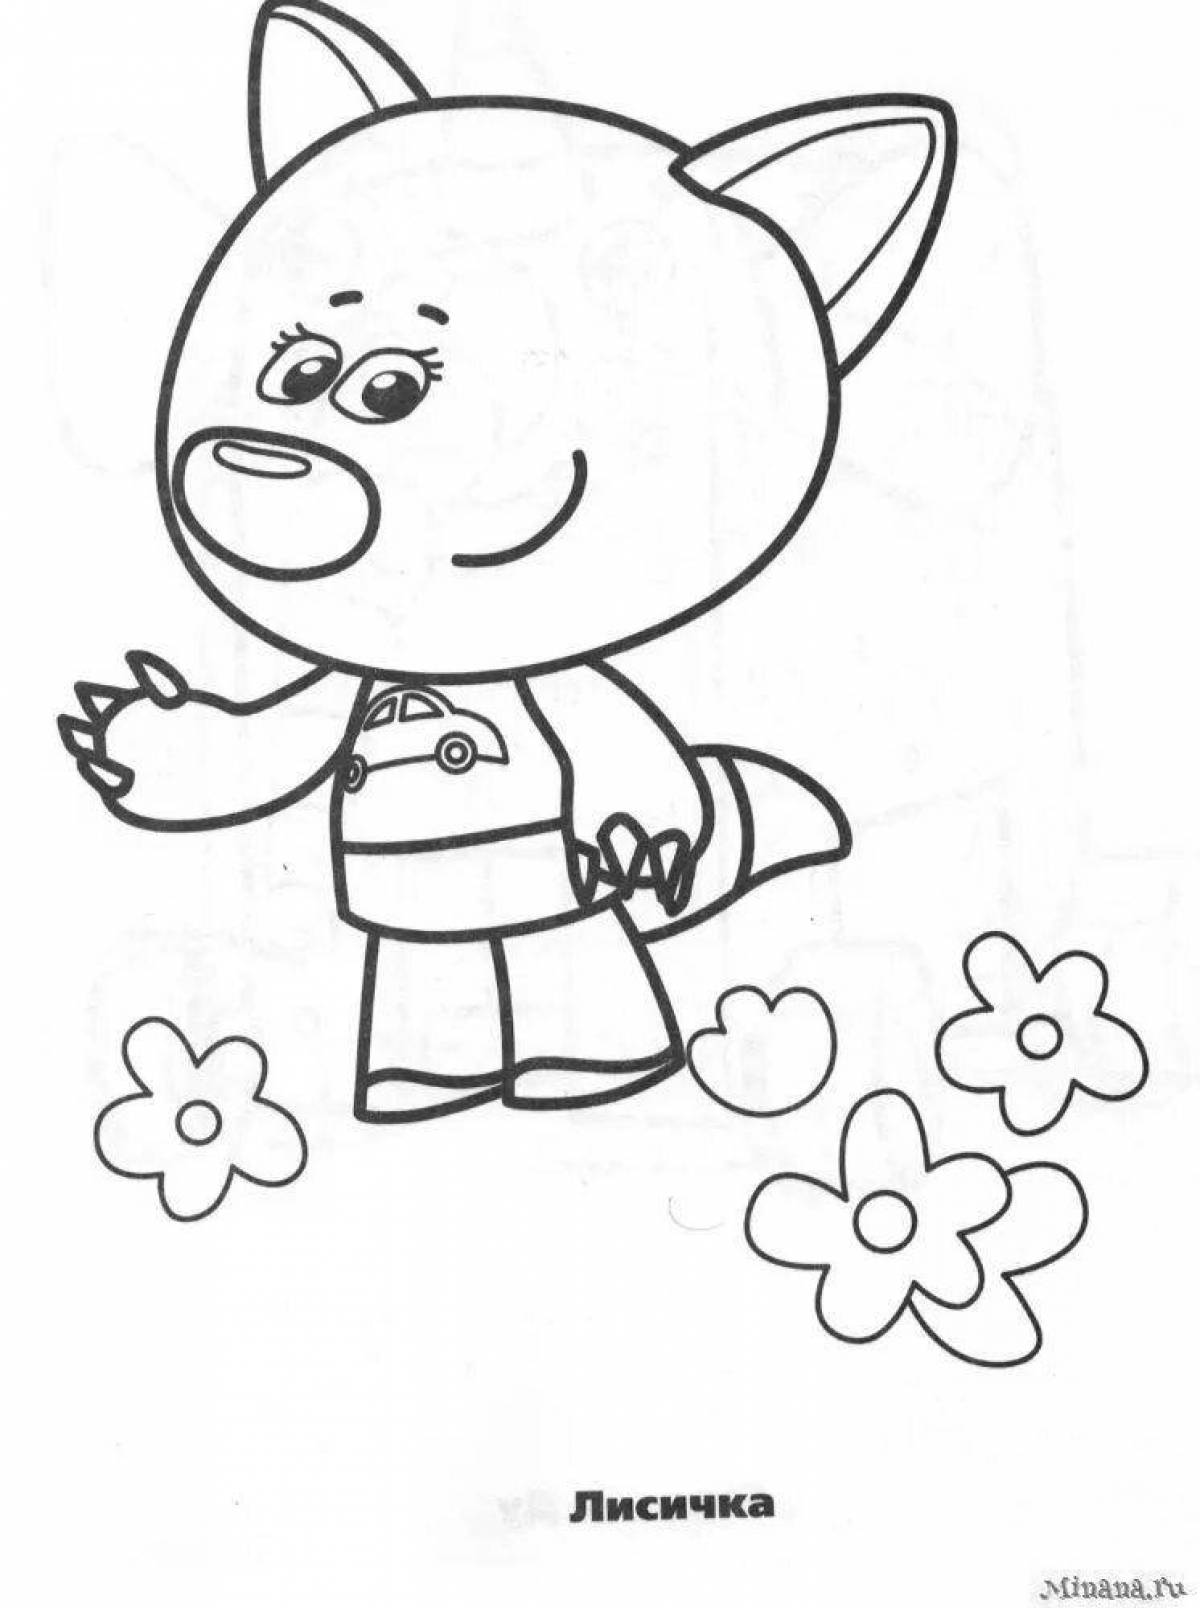 Attractive bear coloring book for kids